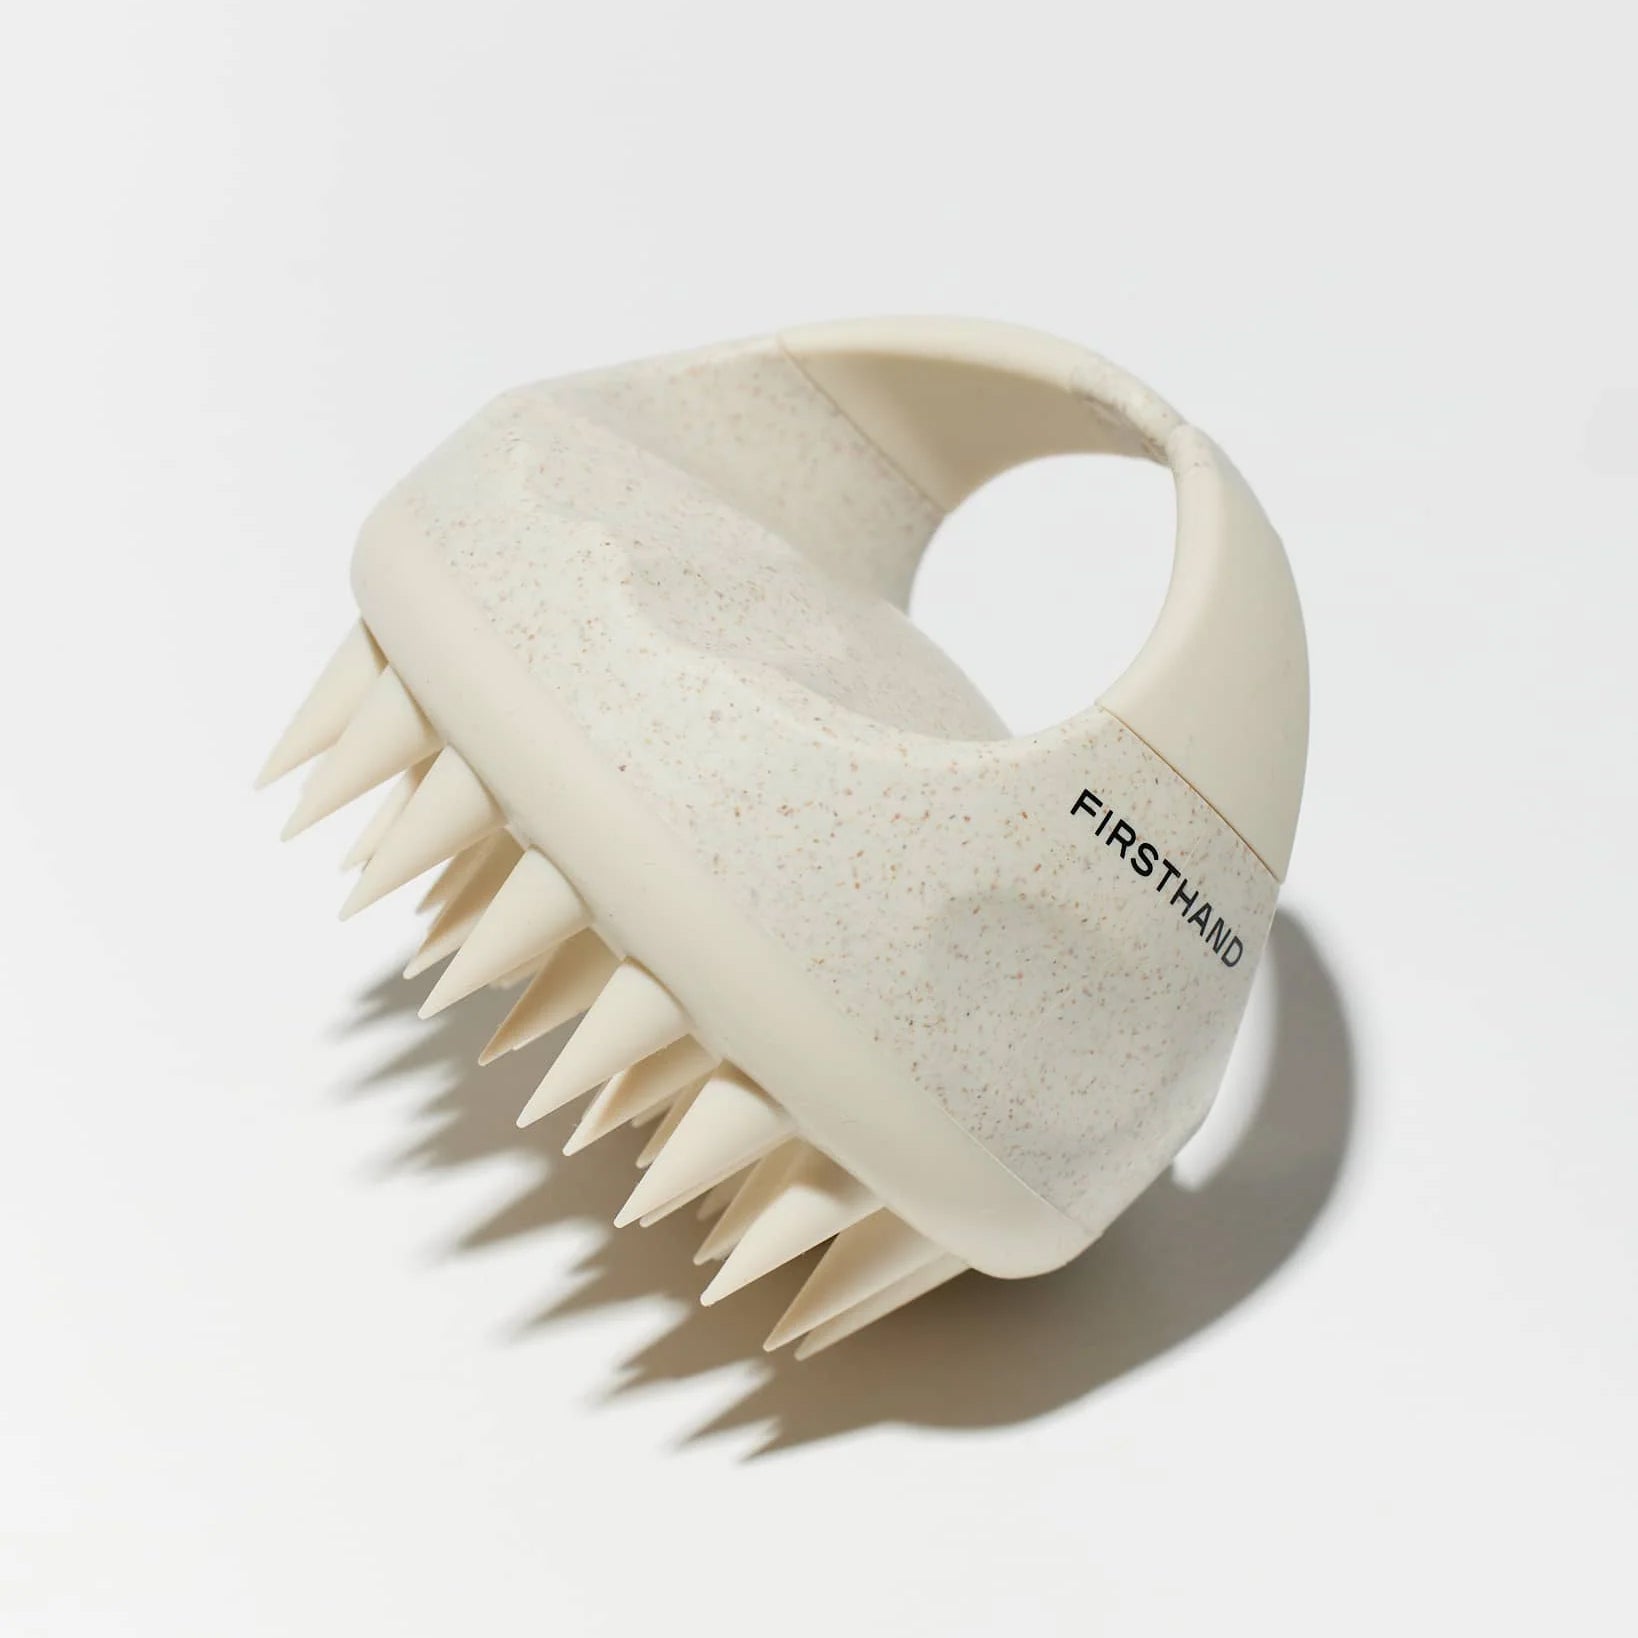 Firsthand Supply - Scalp Massager - The Panic Room